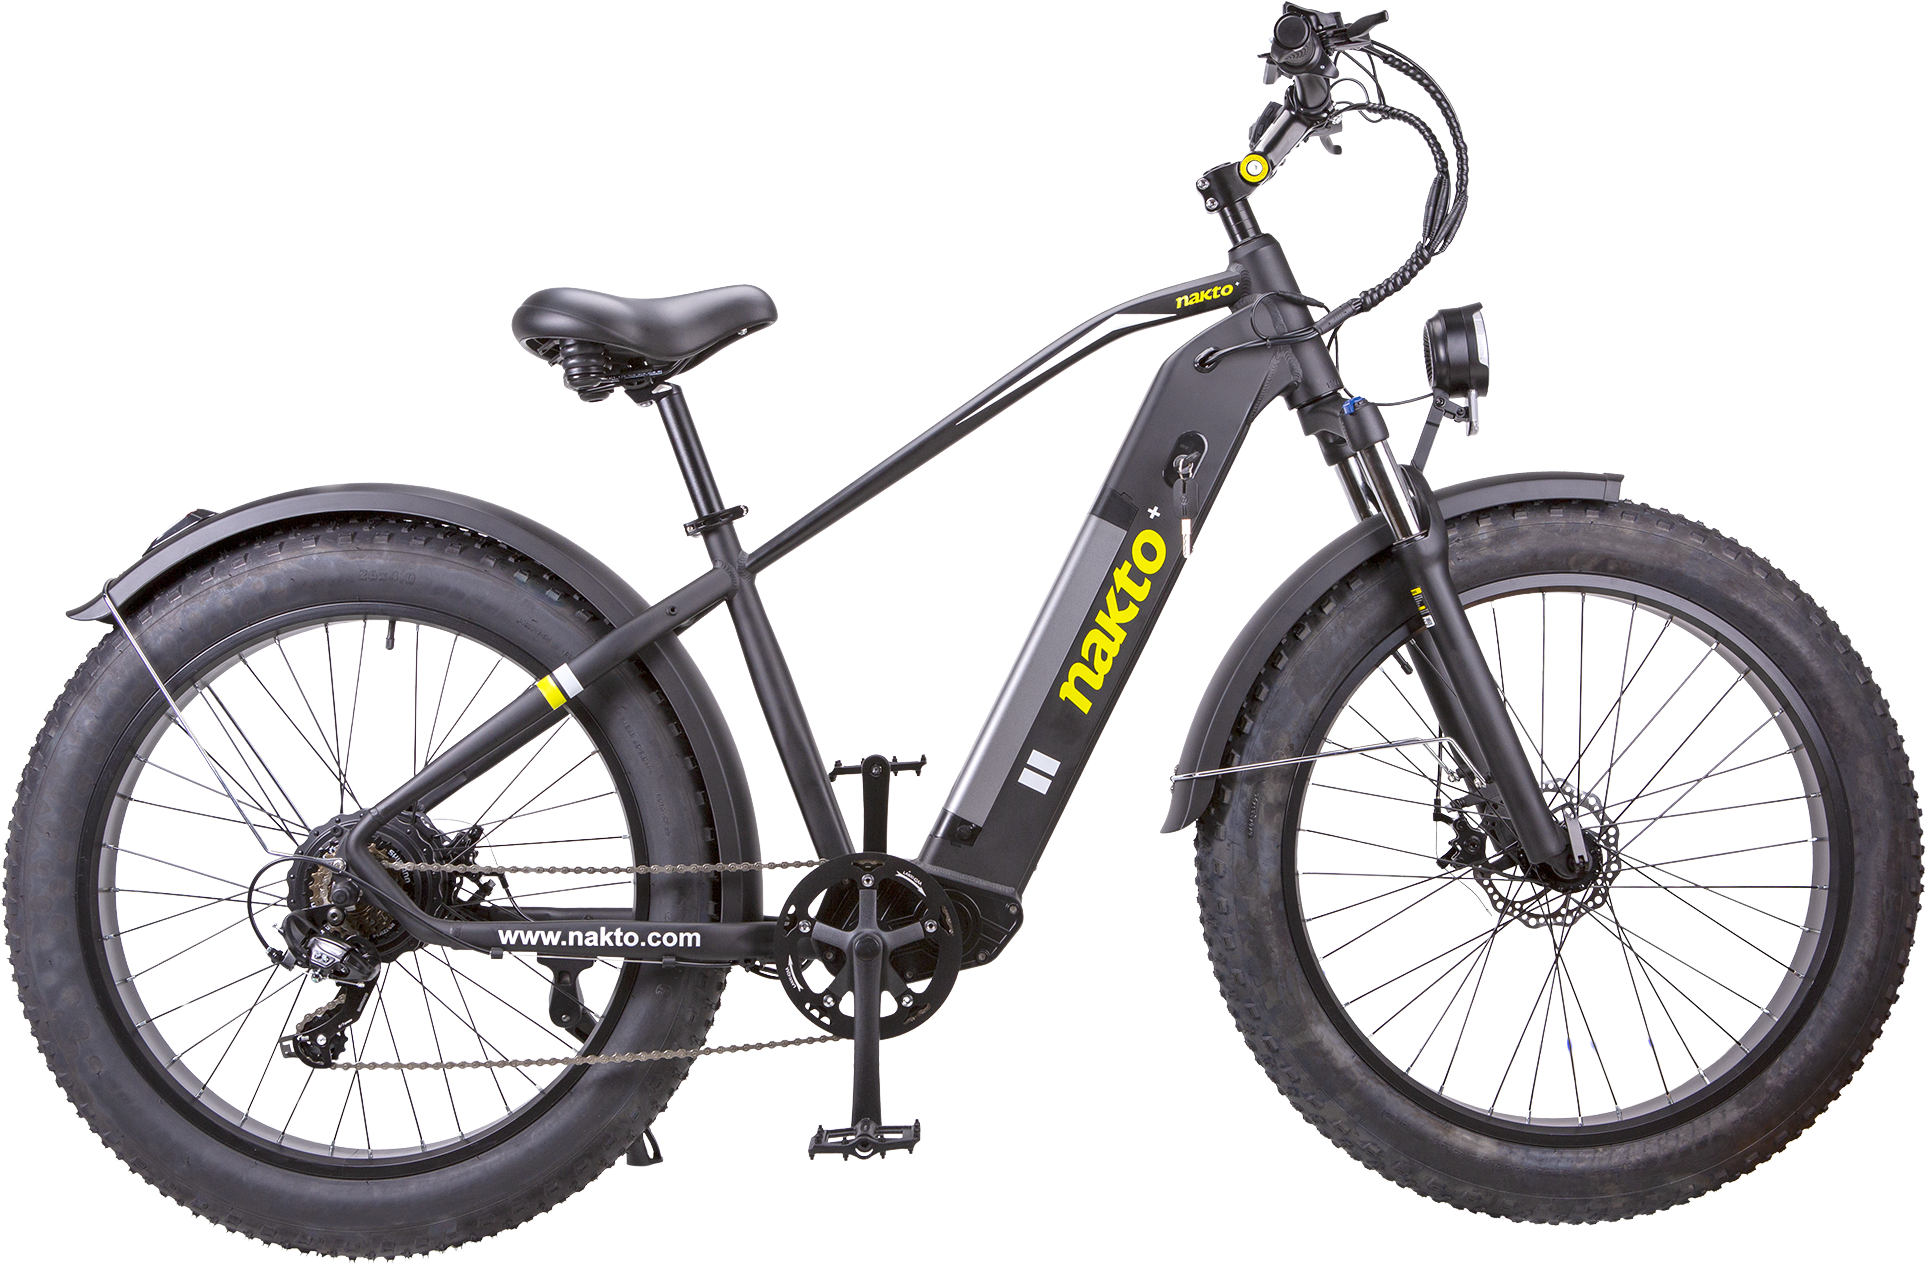 Nakto, NAKTO F6 Fat Tire Electric Bicycle 6 Speed 26" 750W Motor with Peak 1000W 28 MPH 60 Mile Range 48V Lithium Battery Black New